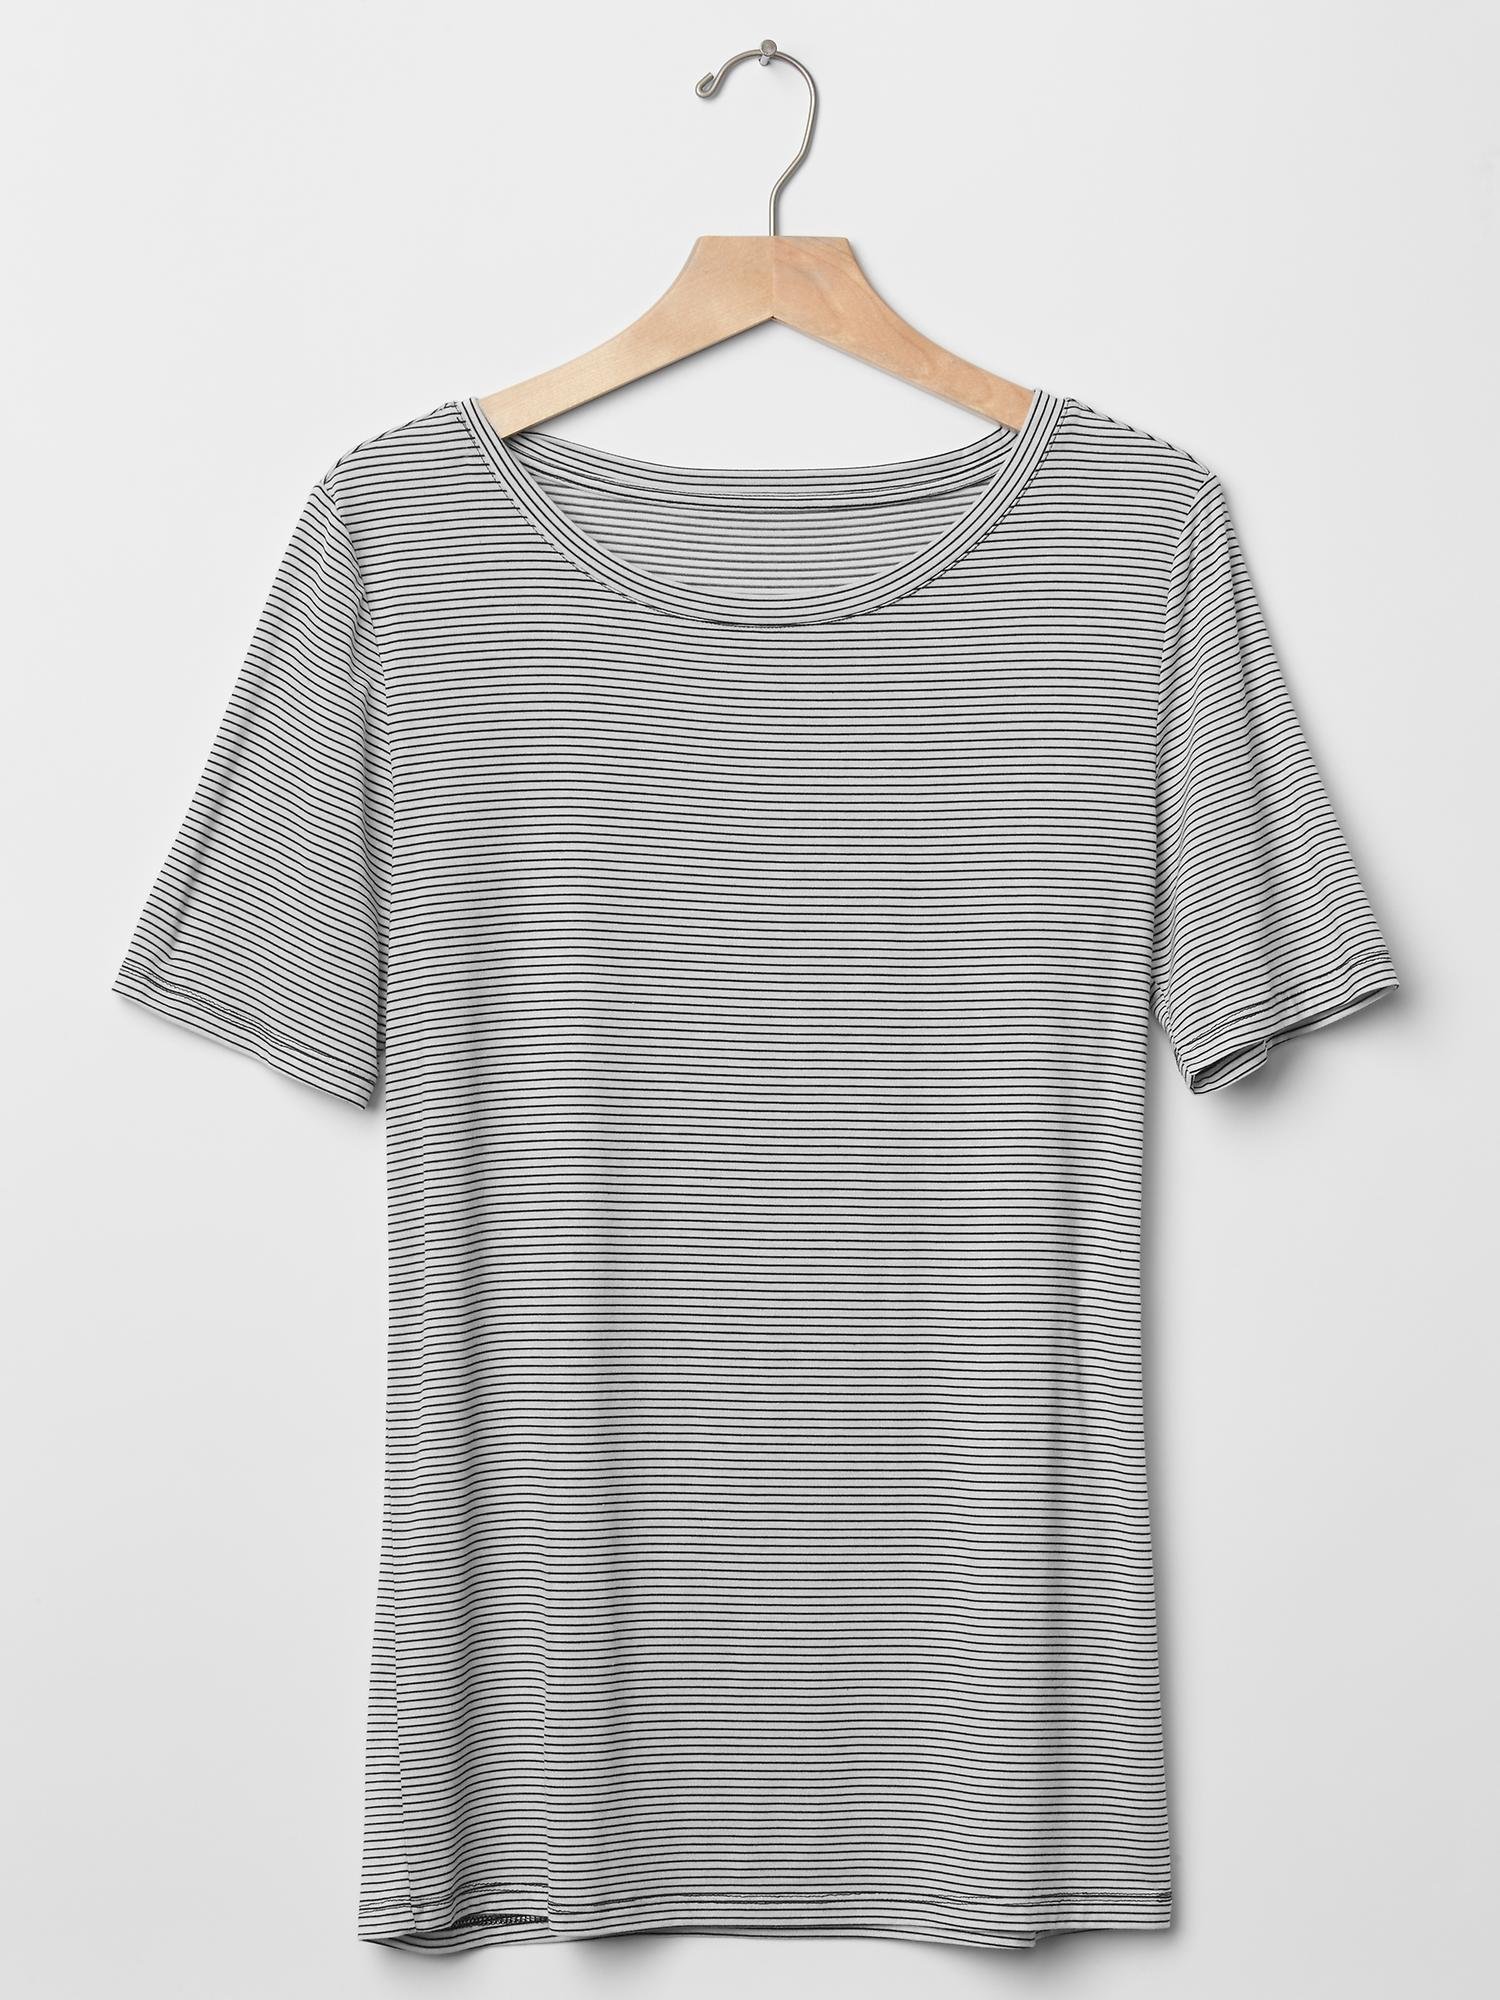 Pure Body modal t-shirt product image